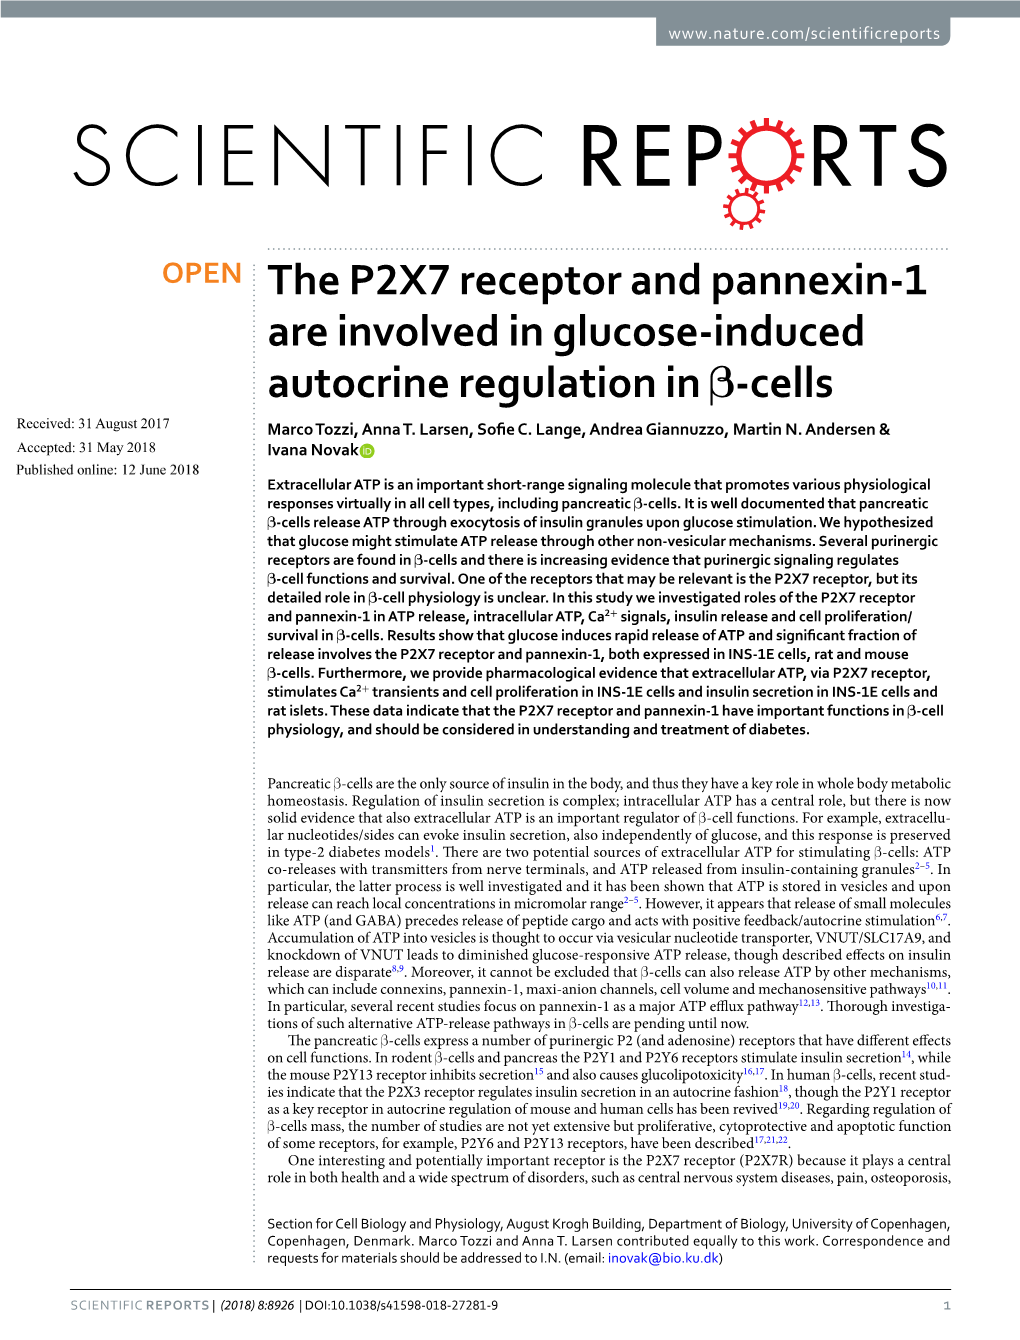 The P2X7 Receptor and Pannexin-1 Are Involved in Glucose-Induced Autocrine Regulation in Β-Cells Received: 31 August 2017 Marco Tozzi, Anna T